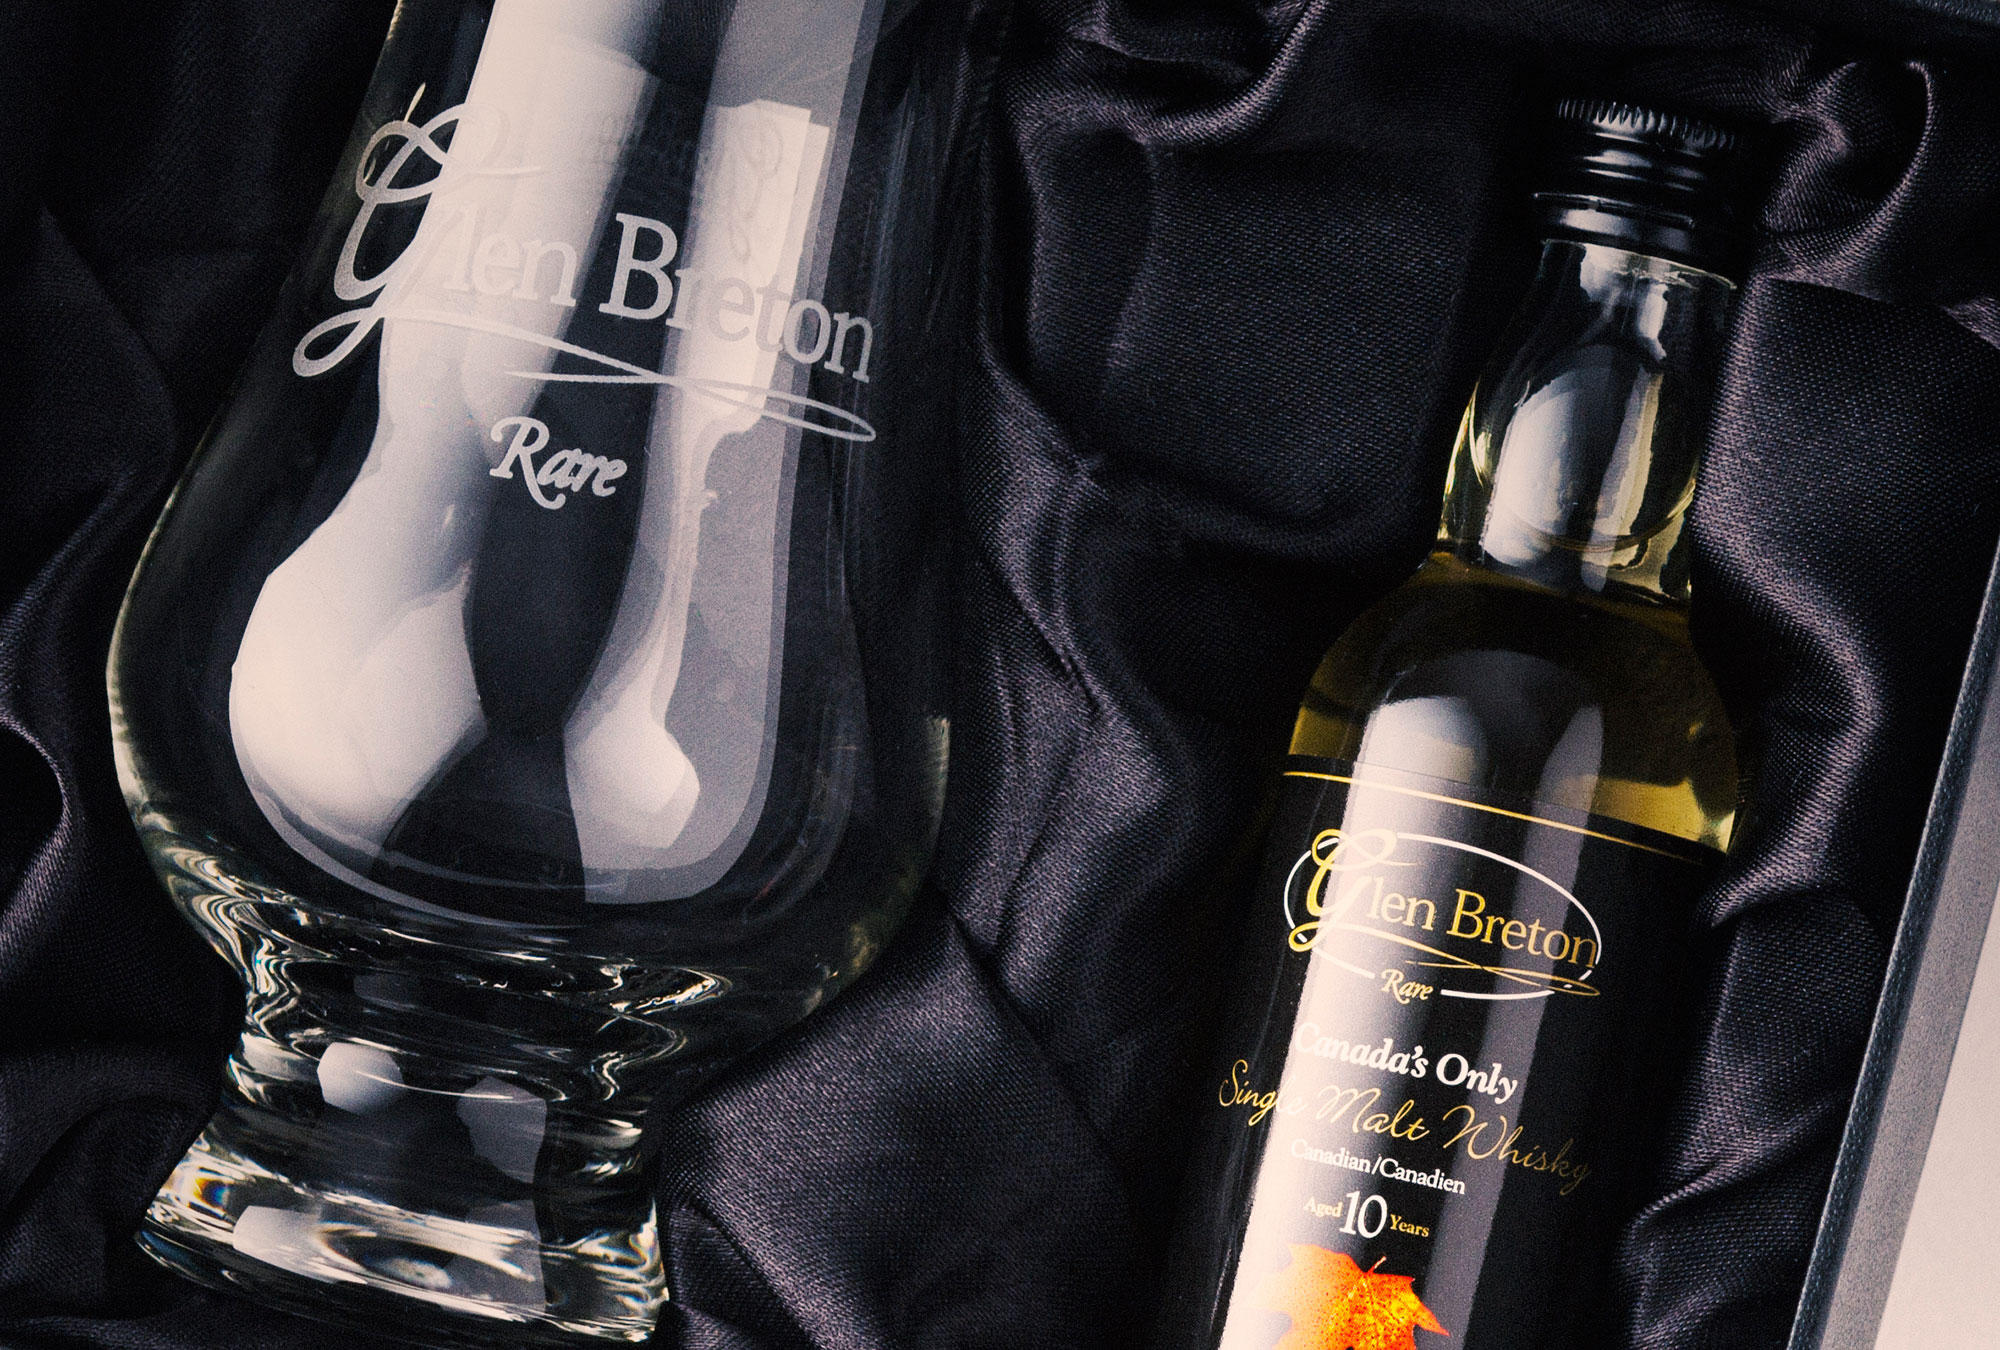  A LITTLE WHISKY GOES A LONG WAY. 